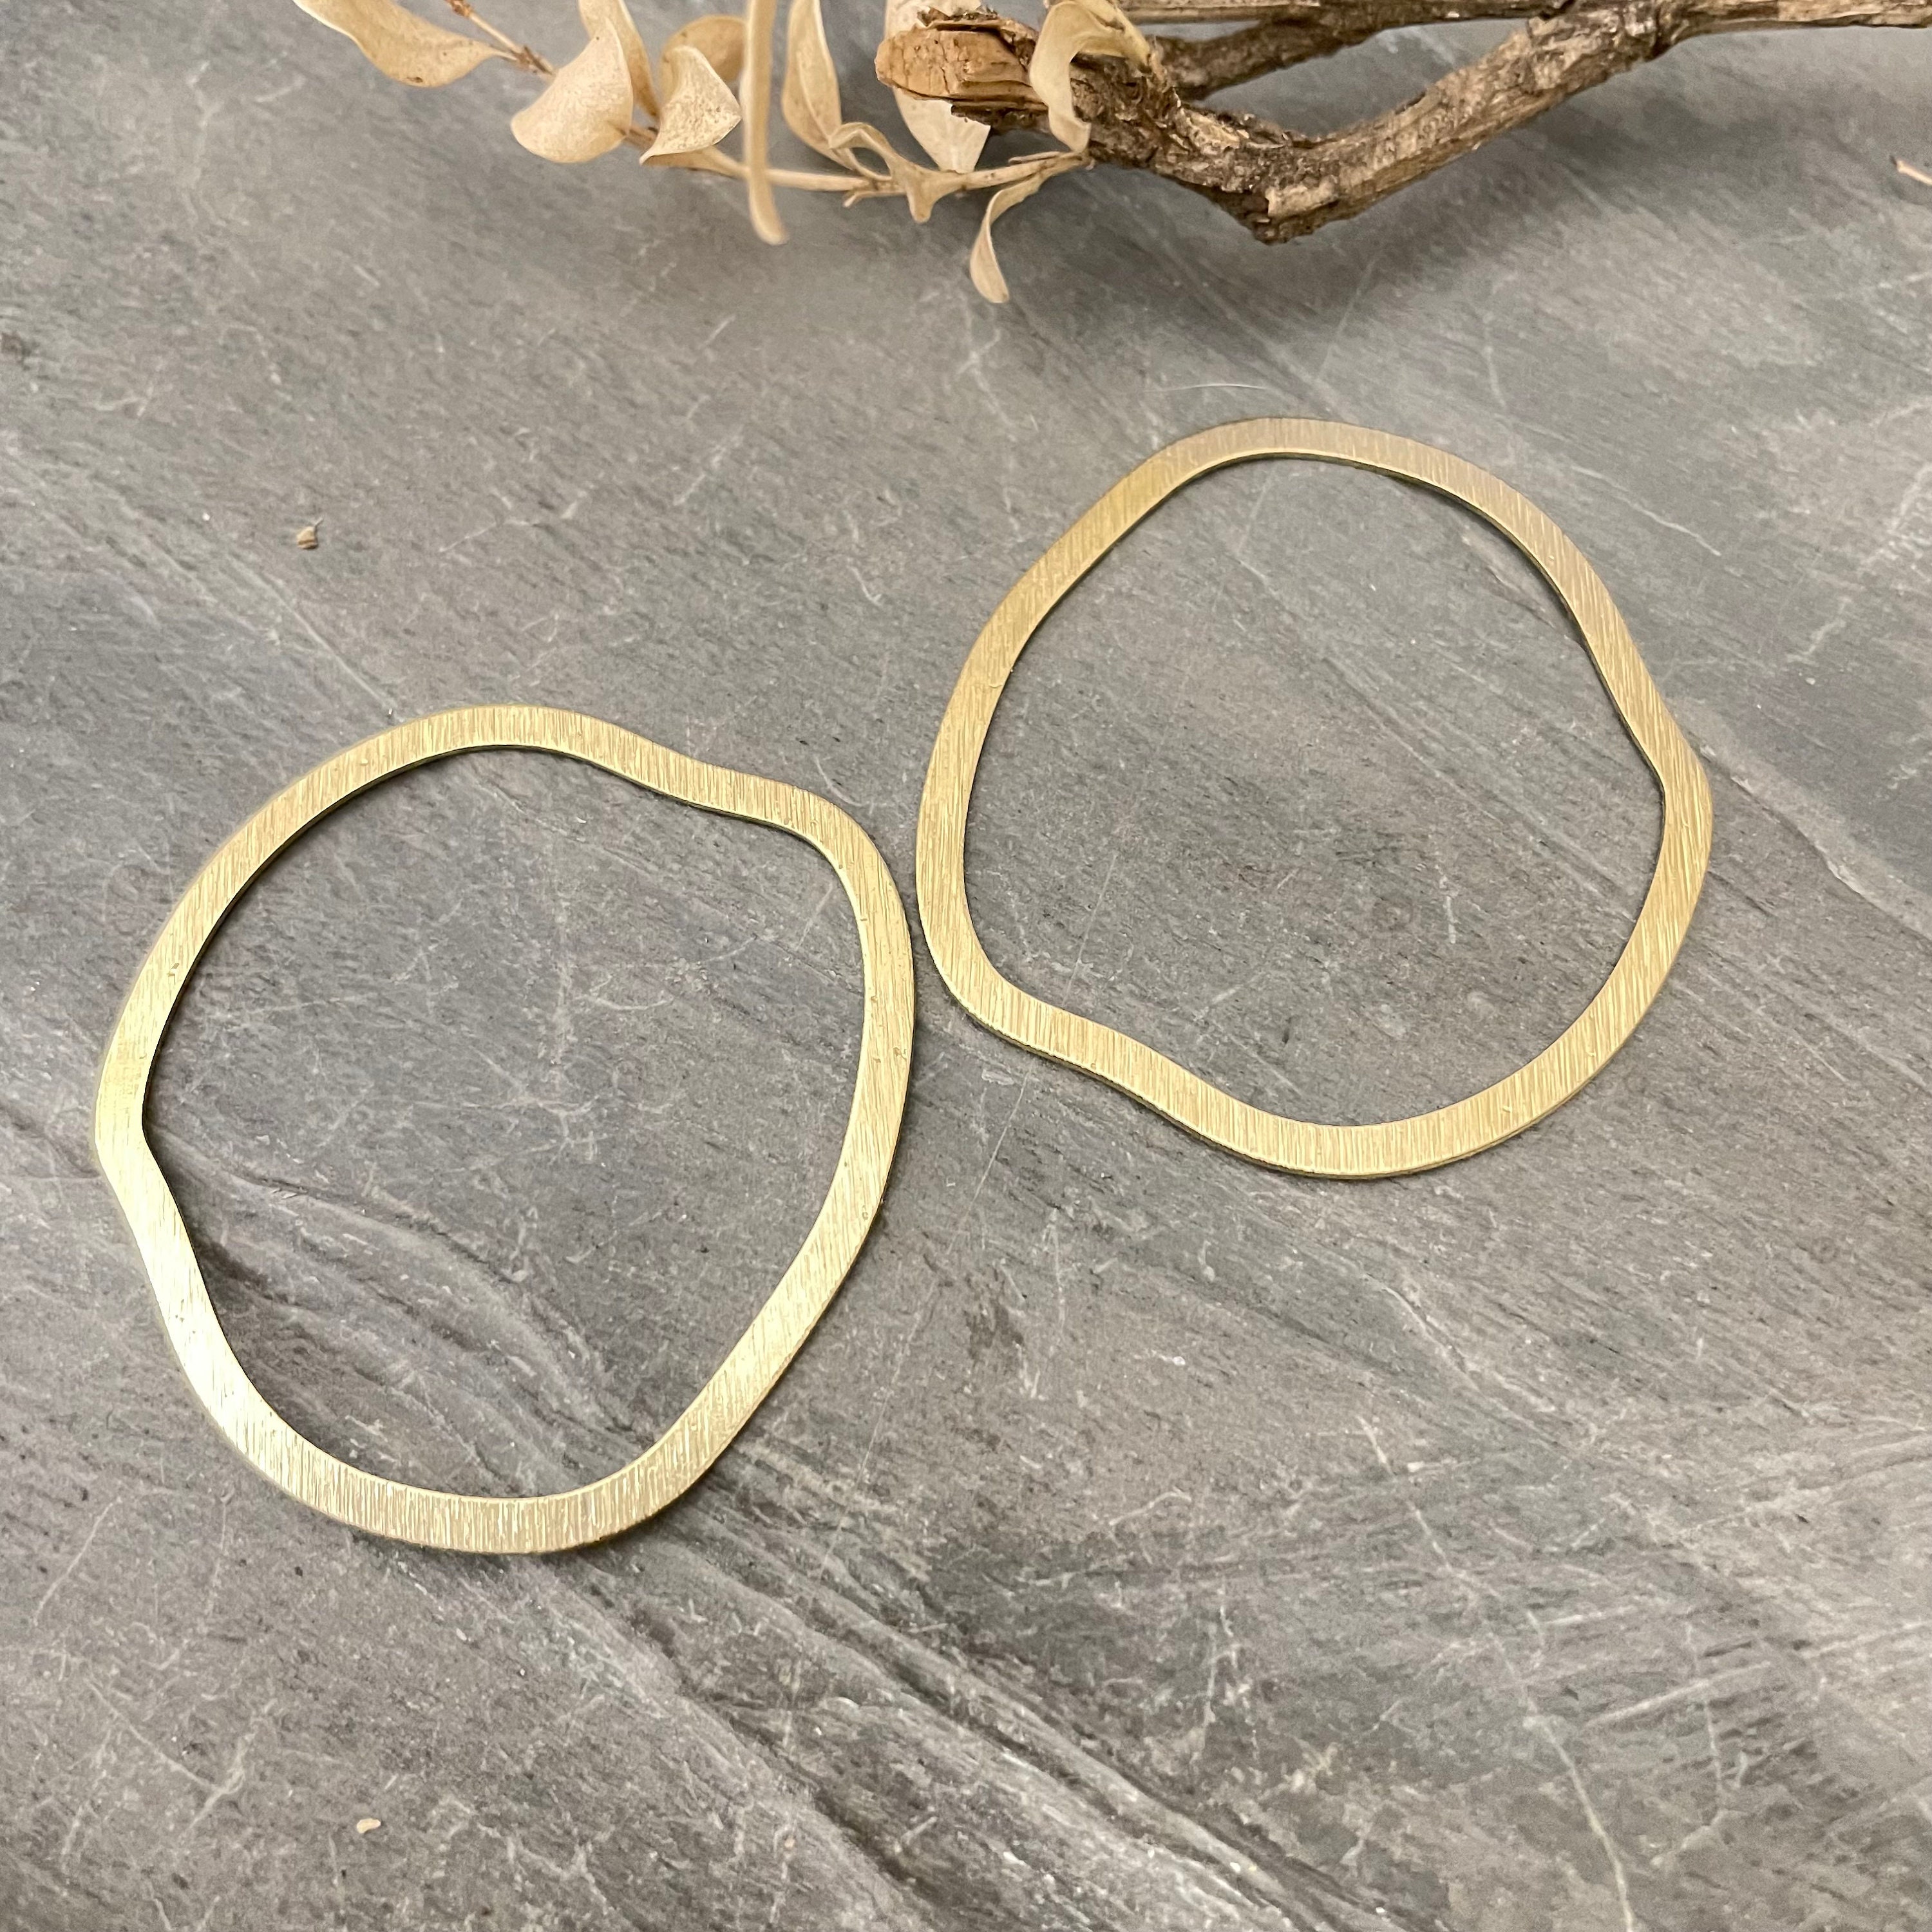 Round Raw Brass Textured Earring Findings for Jewelry Making. 2